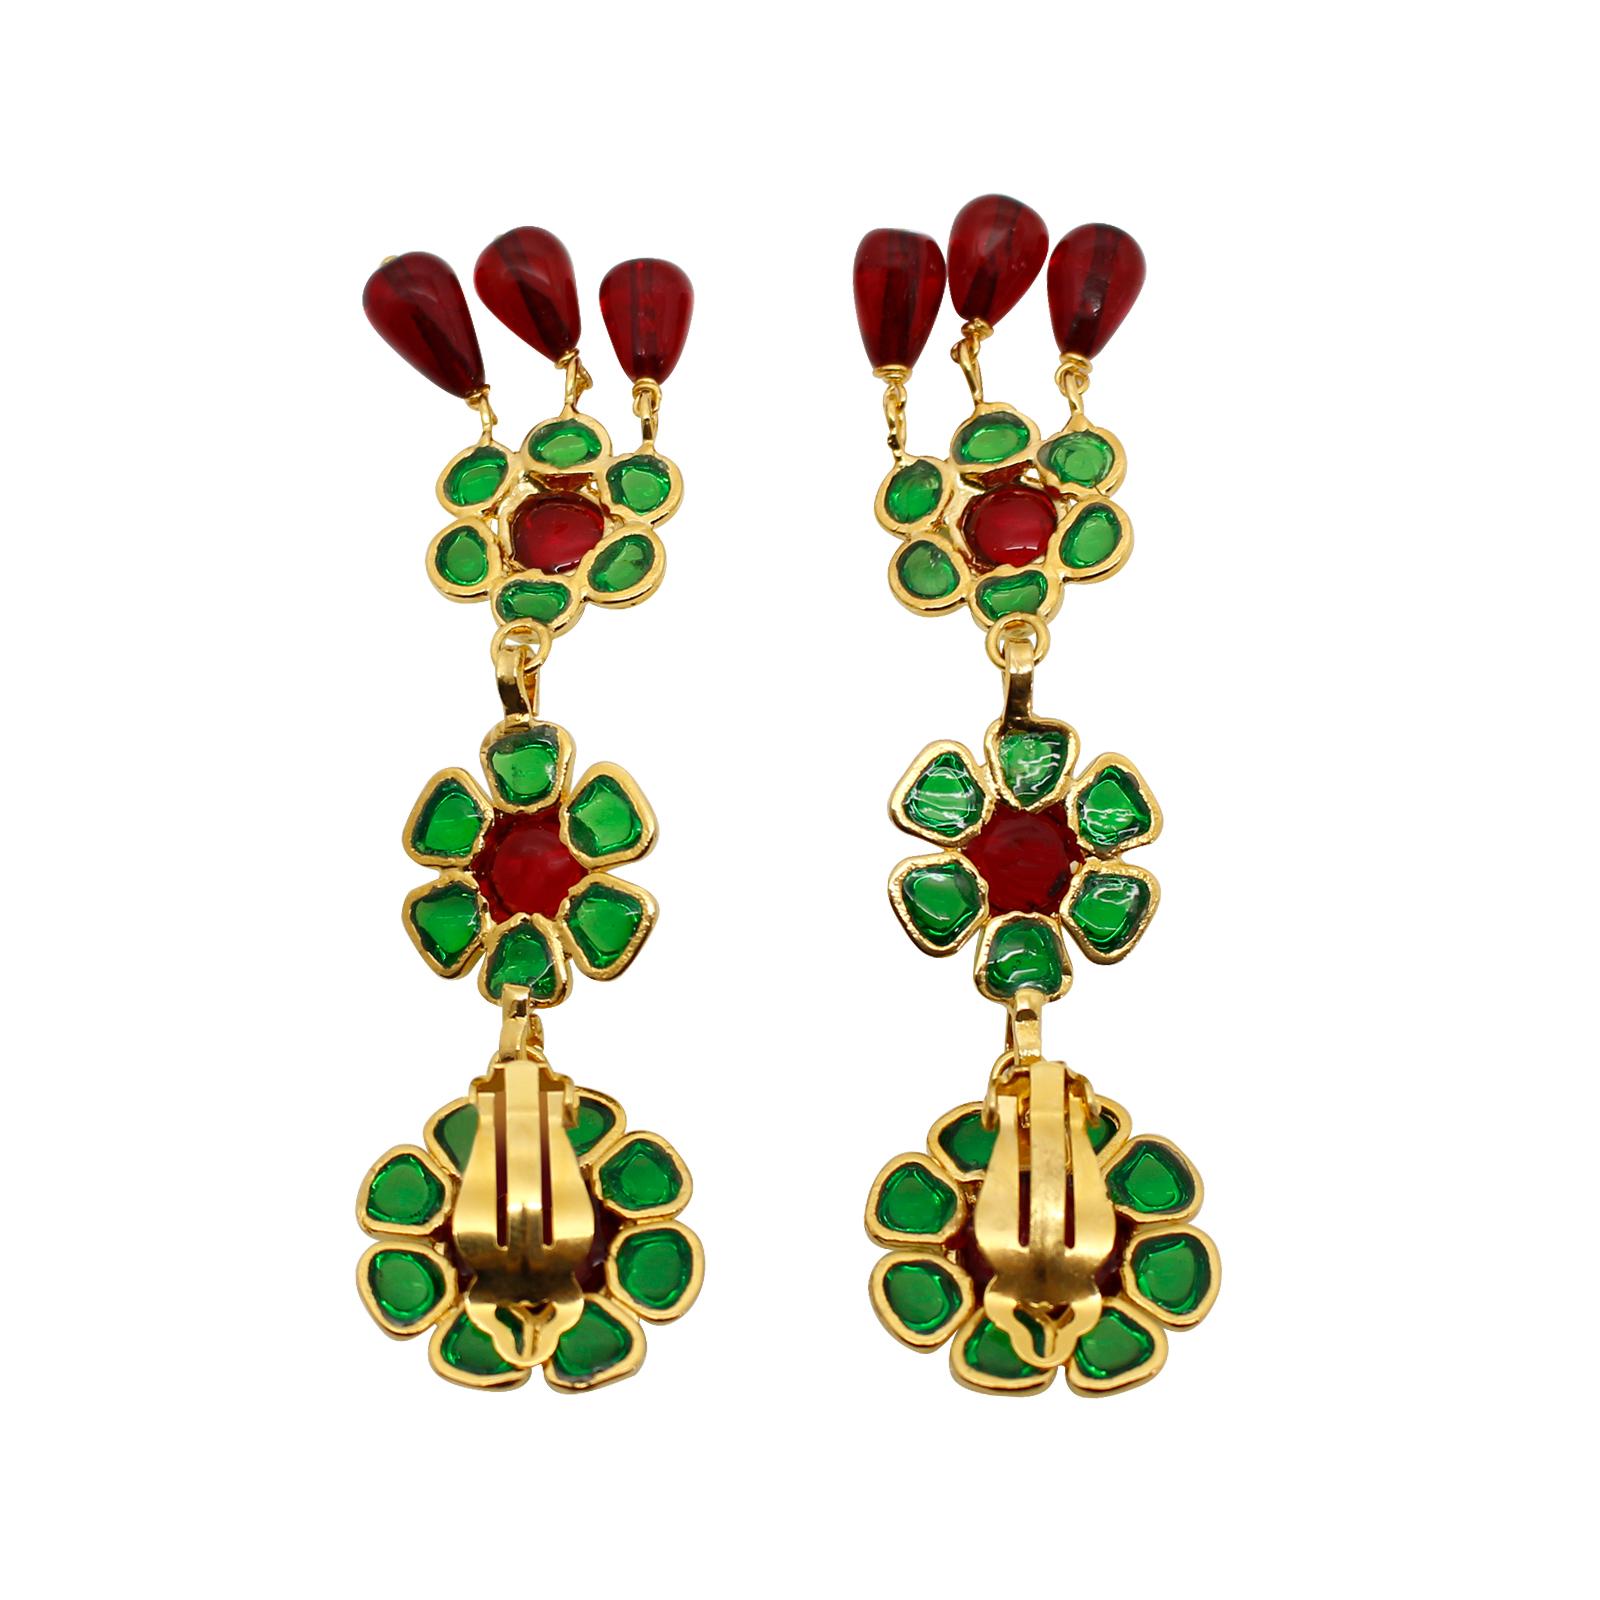 Maison Gripoix Vintage Red and Green Flower Dangling Earrings Circa 1980s For Sale 2